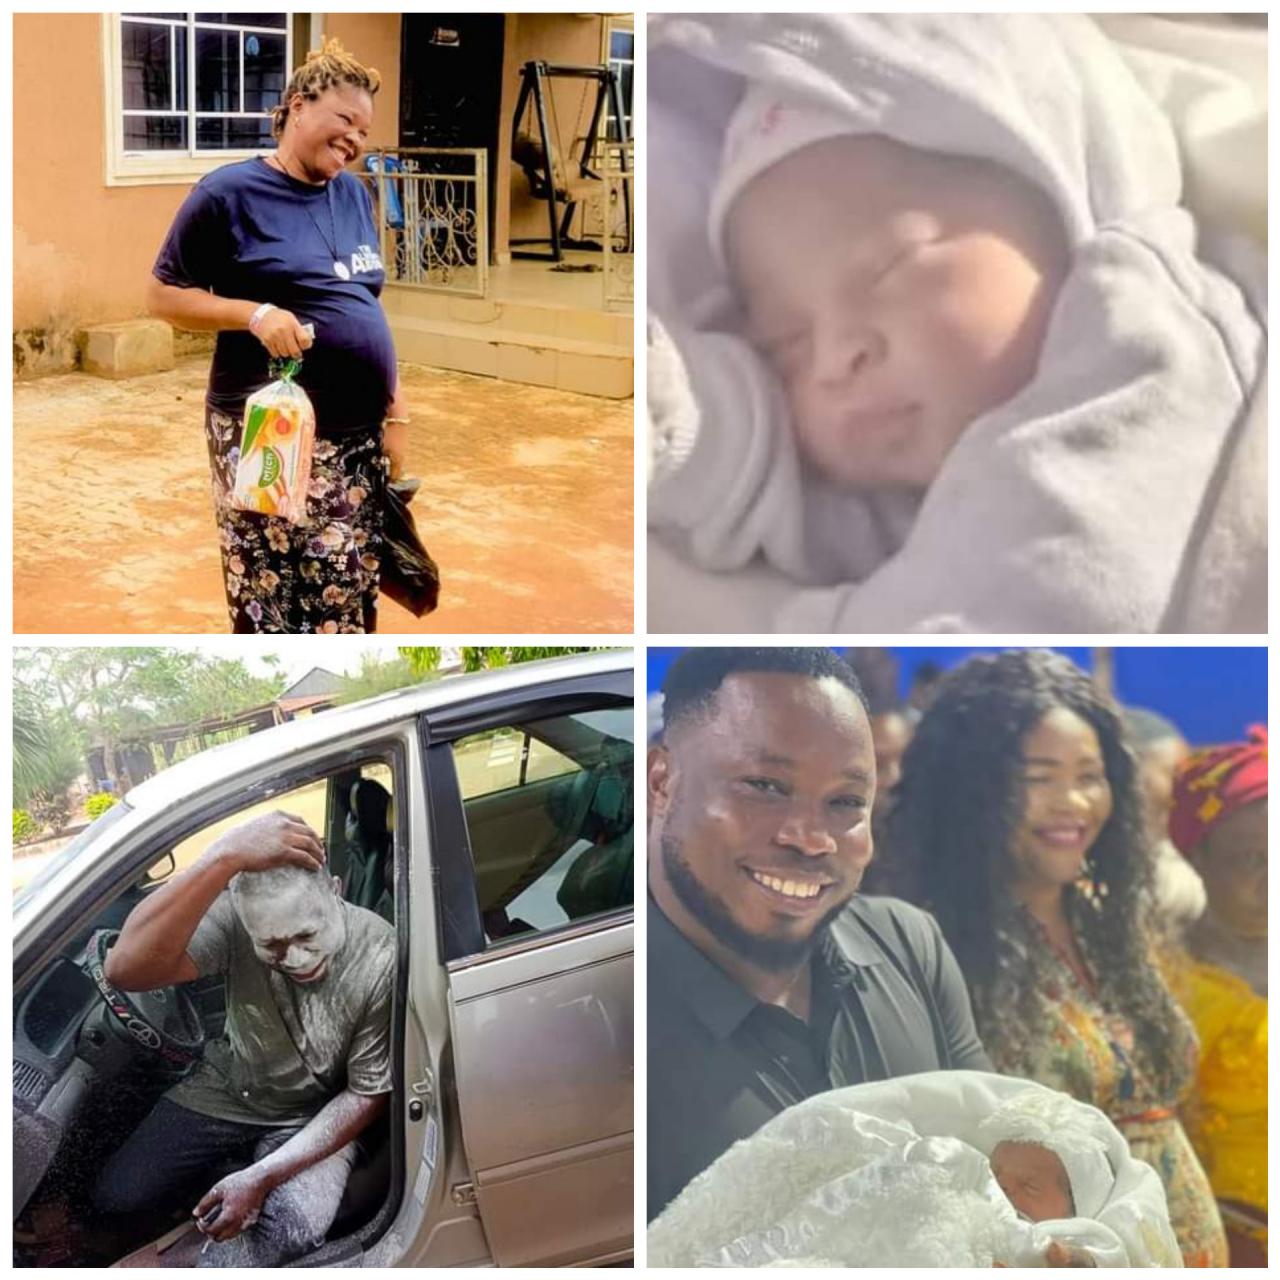 Nigerian man celebrates as he becomes a father after 8 years of waiting 